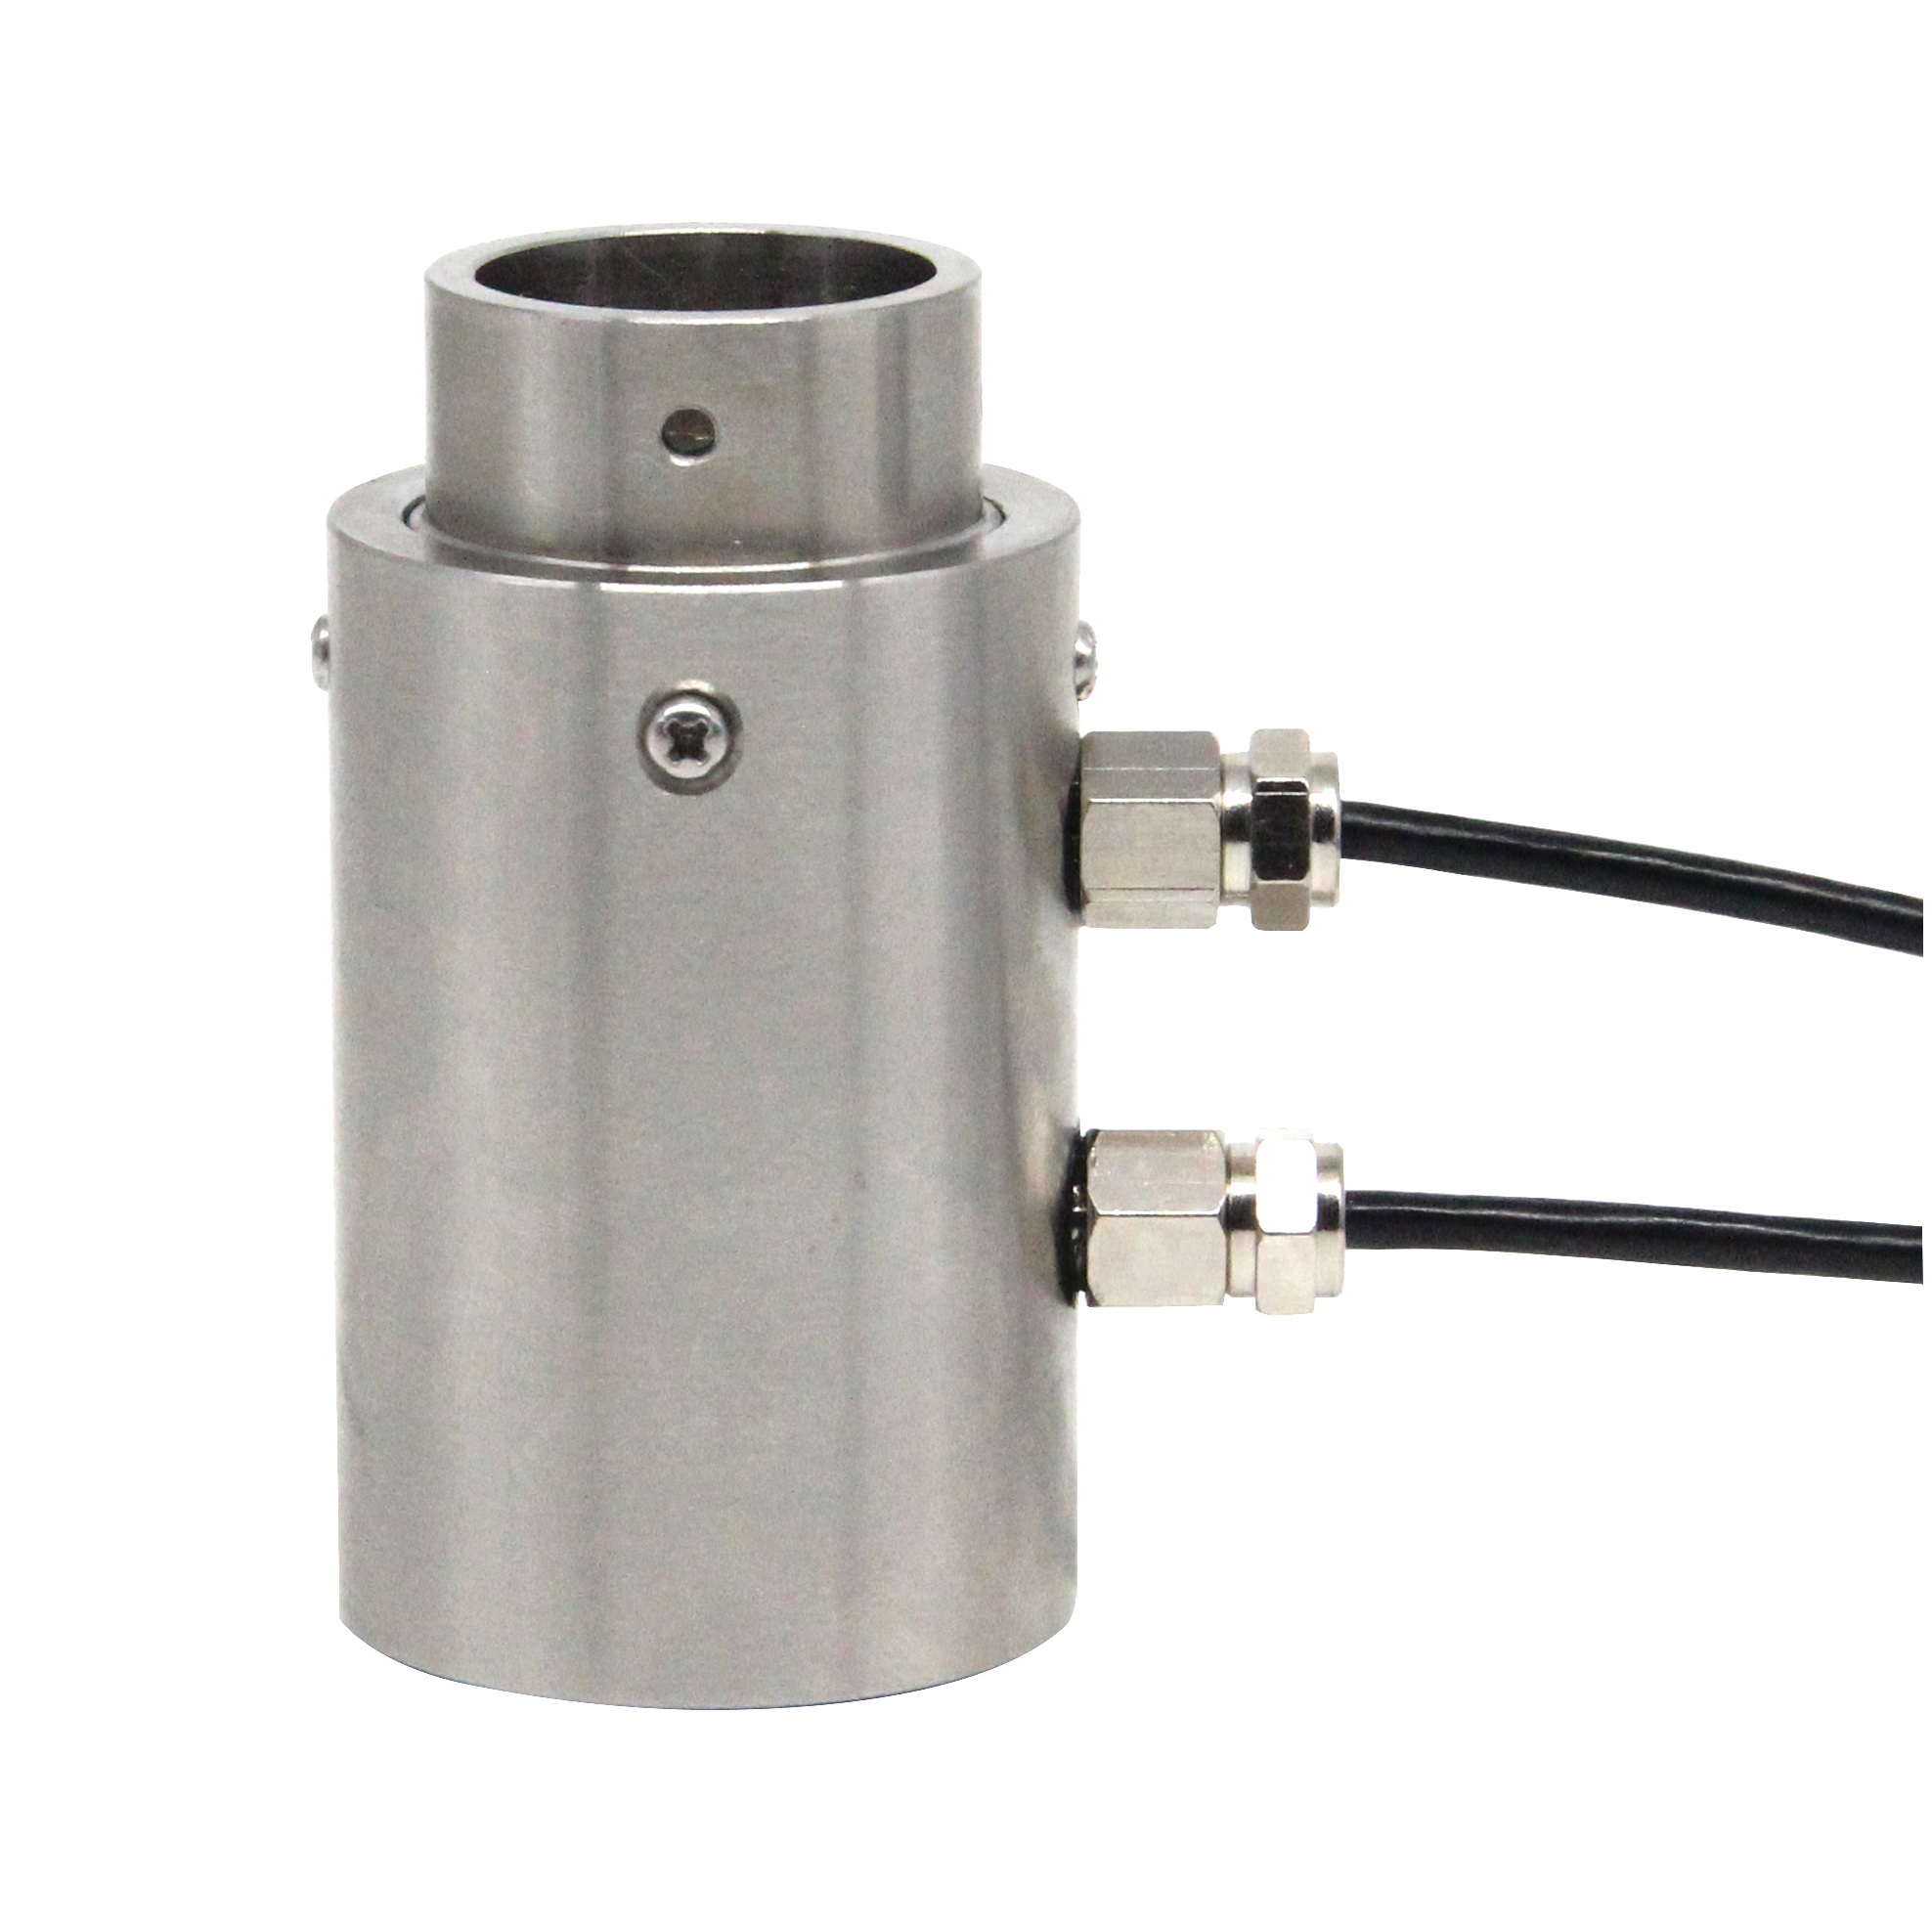 LCX2001 Multi-Axis Force Sensors Two-Dimensional Deflection Sensor 2 Axis Force Sensors